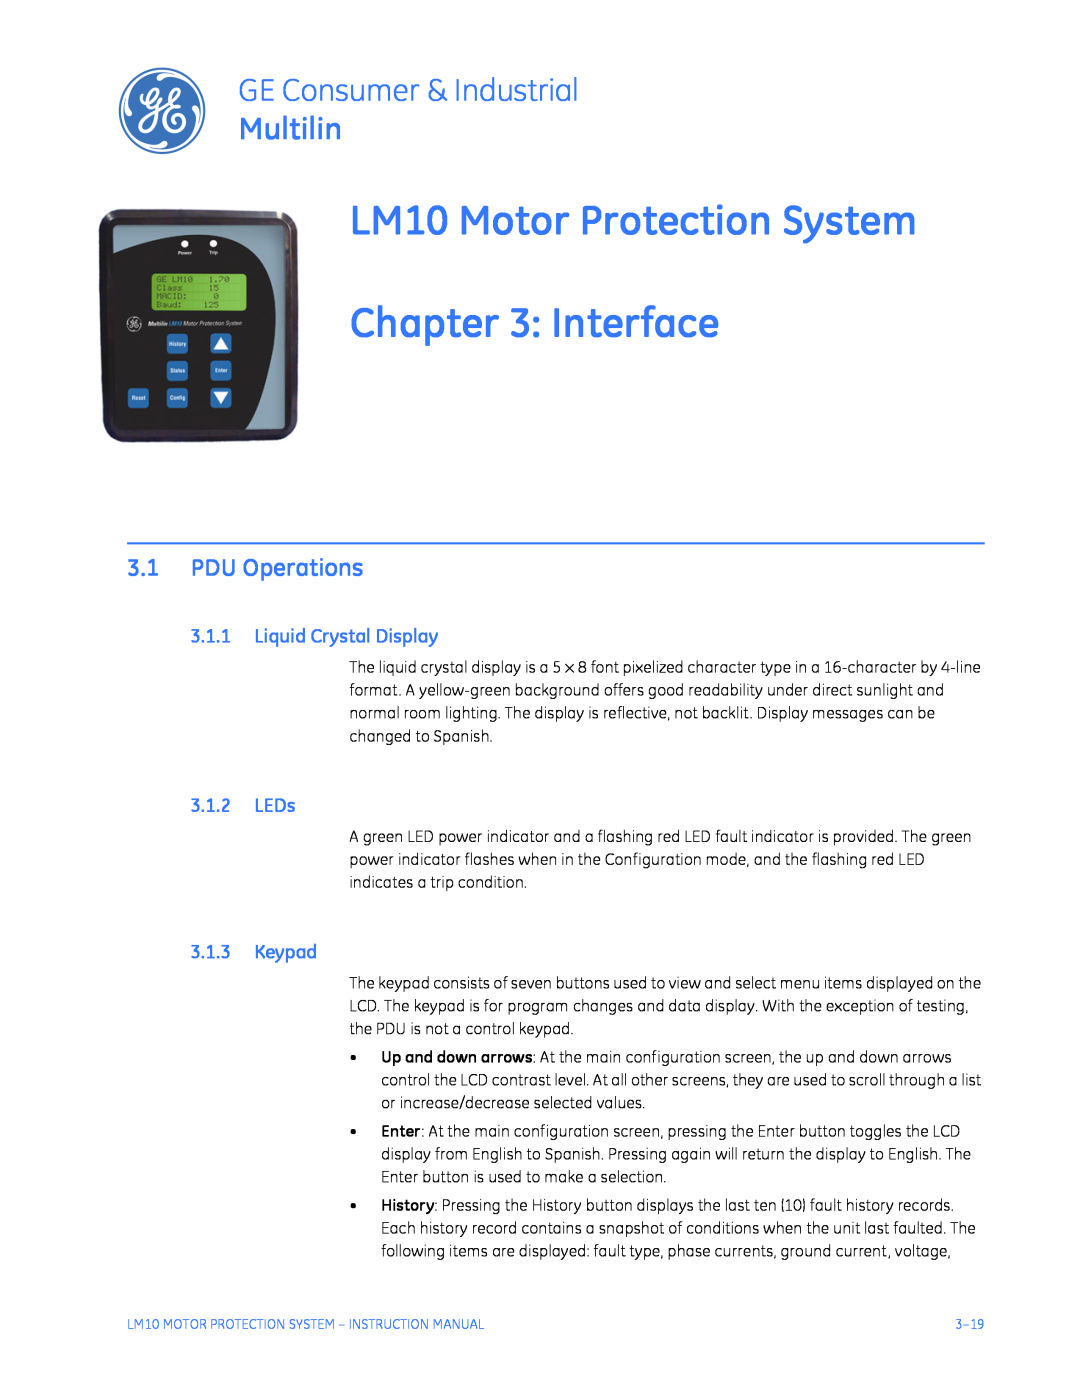 GE LM10 Motor Protection System Interface, PDU Operations, Liquid Crystal Display, LEDs, Keypad, Multilin 